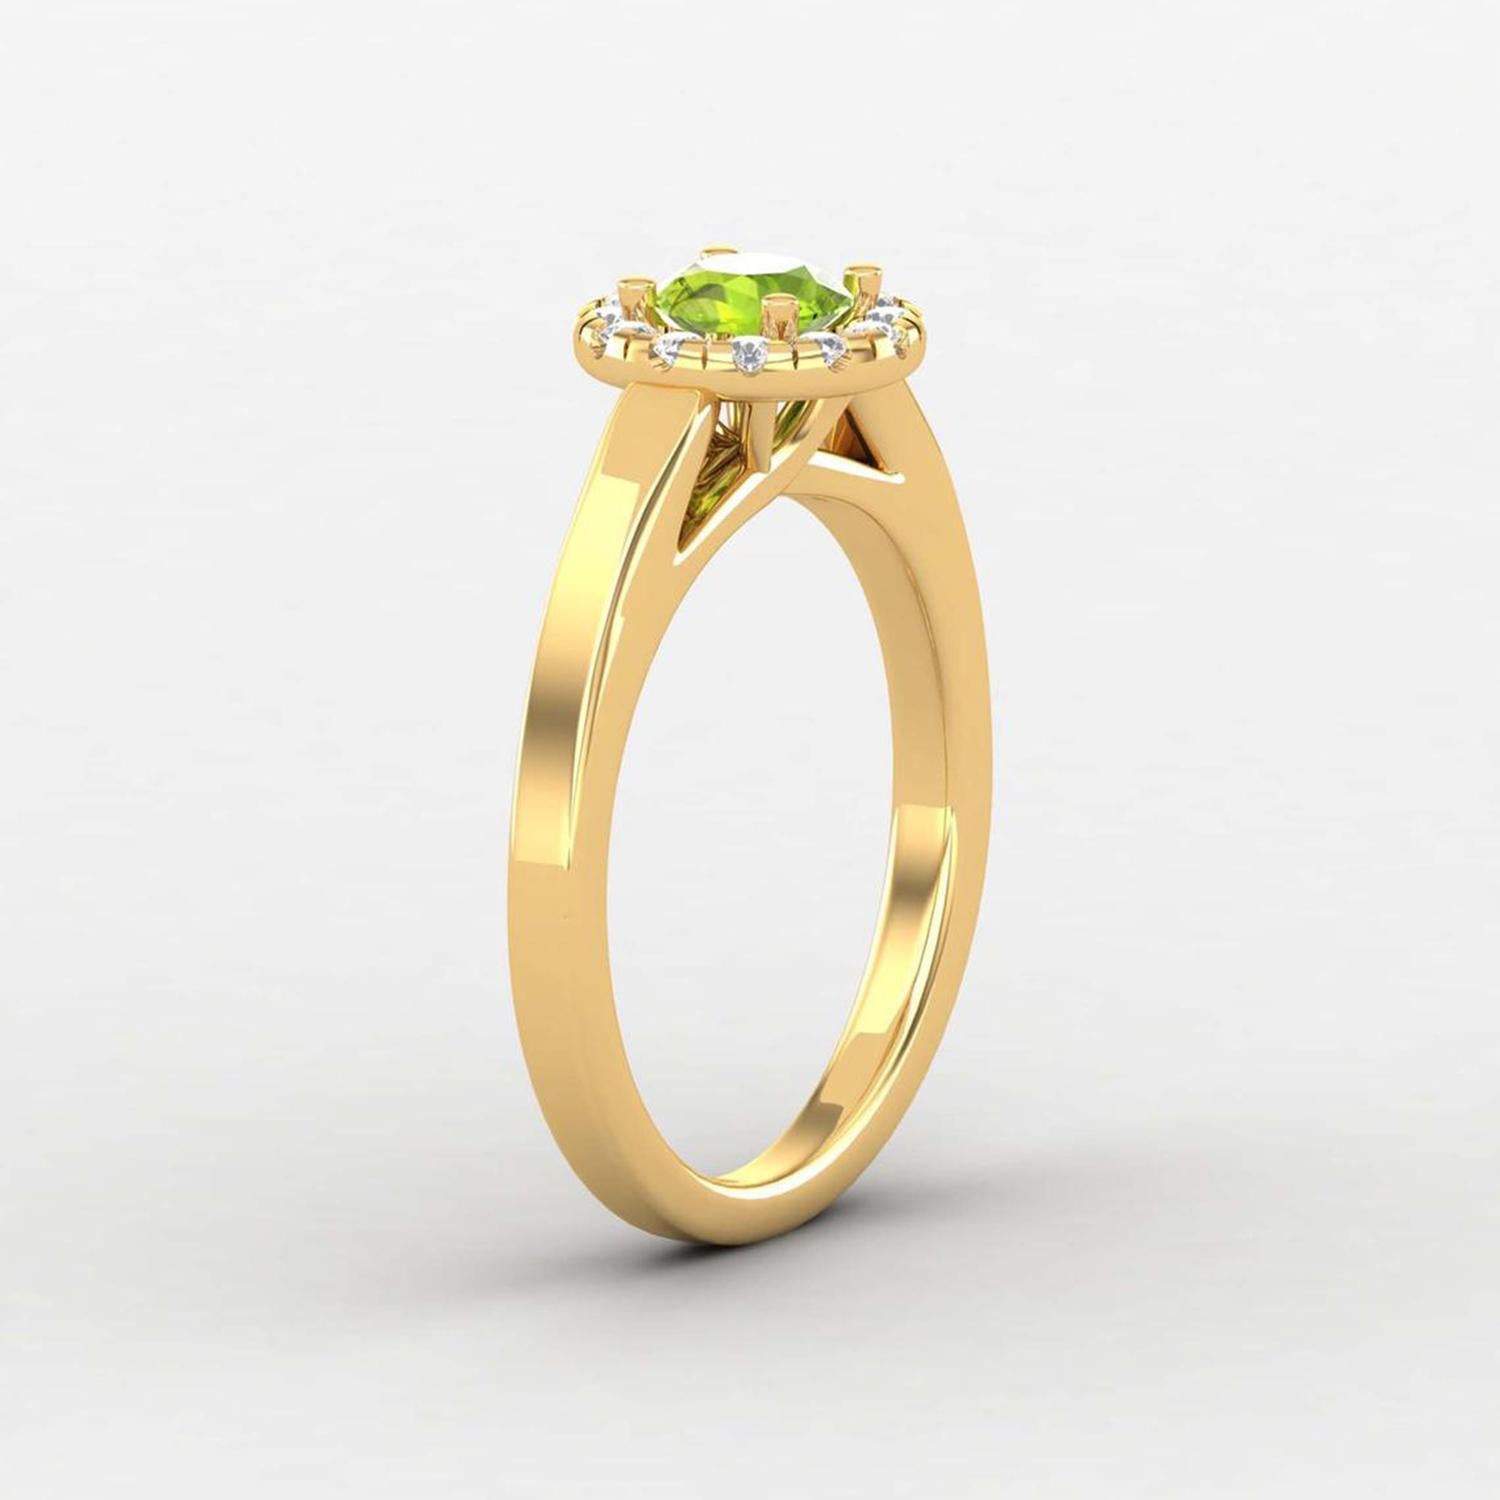 Modern 14 Karat Gold 5MM Round Peridot Ring / 1.5MM Round Diamond Ring / Solitaire Ring For Sale